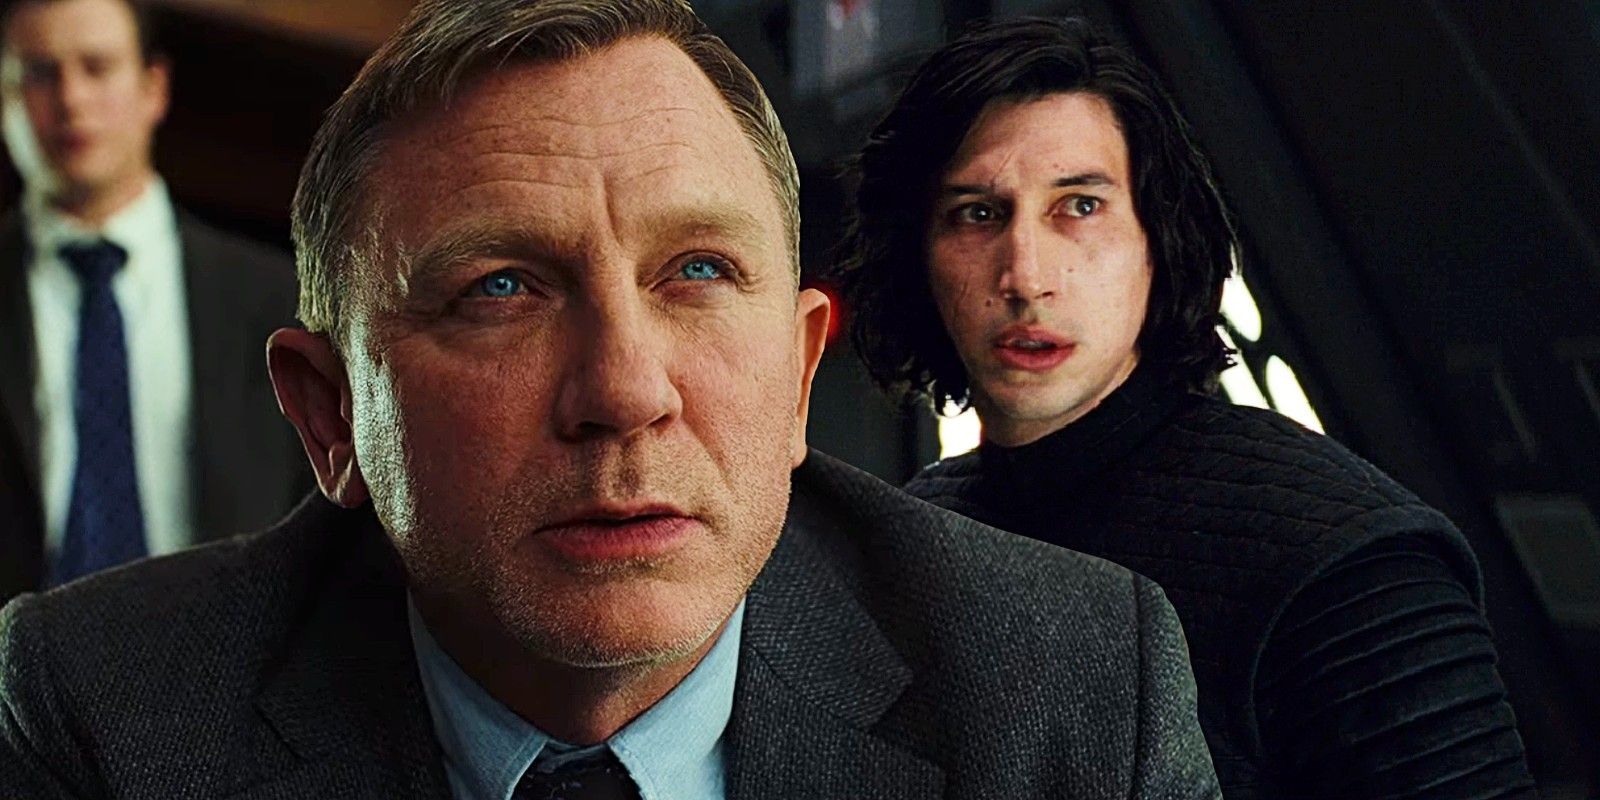 Daniel Craig as Benoit Blanc in Knives Out and Adam Driver as Kylo Ren in Star Wars The Last Jedi